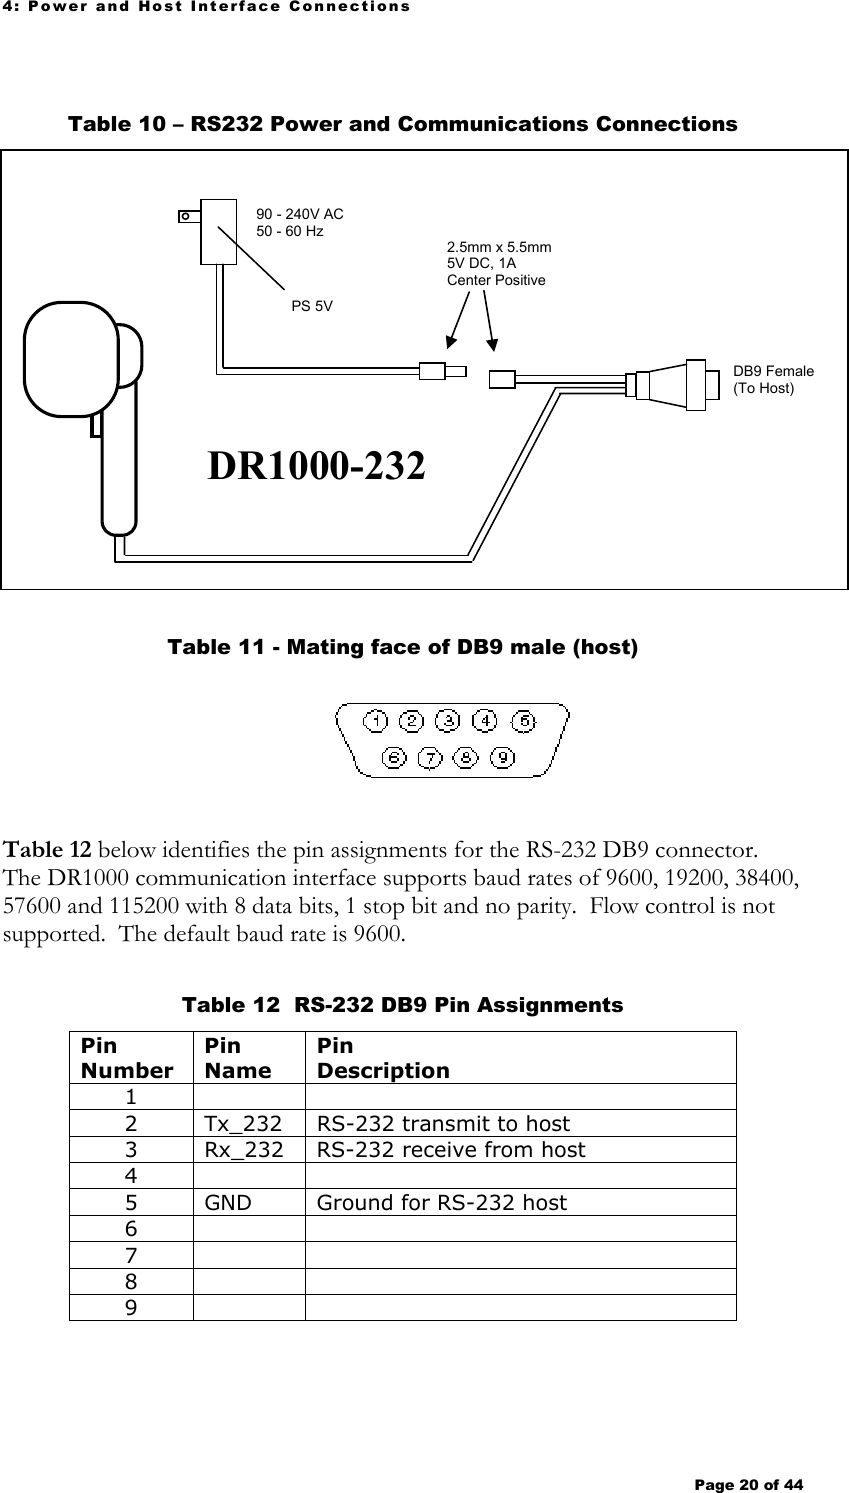 4: Power and Host Interface Connections Page 20 of 44    Table 10 – RS232 Power and Communications Connections   Table 11 - Mating face of DB9 male (host)     Table 12 below identifies the pin assignments for the RS-232 DB9 connector.  The DR1000 communication interface supports baud rates of 9600, 19200, 38400, 57600 and 115200 with 8 data bits, 1 stop bit and no parity.  Flow control is not supported.  The default baud rate is 9600.  Table 12  RS-232 DB9 Pin Assignments Pin Number Pin Name Pin Description 1    2  Tx_232  RS-232 transmit to host 3  Rx_232  RS-232 receive from host 4    5  GND  Ground for RS-232 host 6    7    8    9    2.5mm x 5.5mm 5V DC, 1A Center Positive DR1000-232DB9 Female (To Host) 90 - 240V AC 50 - 60 HzPS 5V